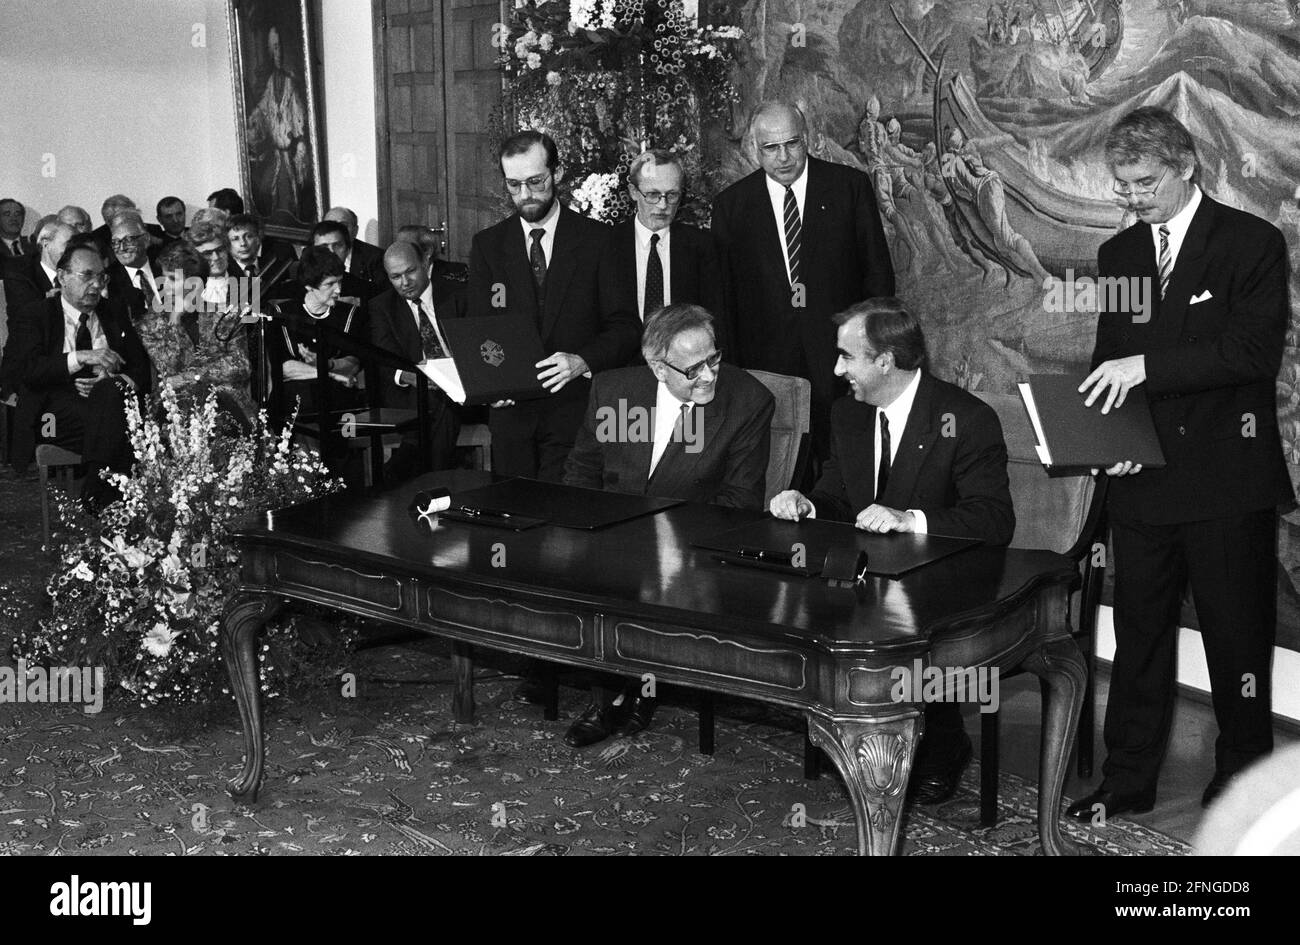 Germany, Bonn, 18.05.1990 Archive No.: 16-39-24 State Treaty between FRG and GDR Photo: from left to right: GDR Prime Minister Lothar de Maiziere, Federal Chancellor Helmut Kohl, GDR Finance Minister Walter Romberg and Federal Finance Minister Theo Waigel [automated translation] Stock Photo